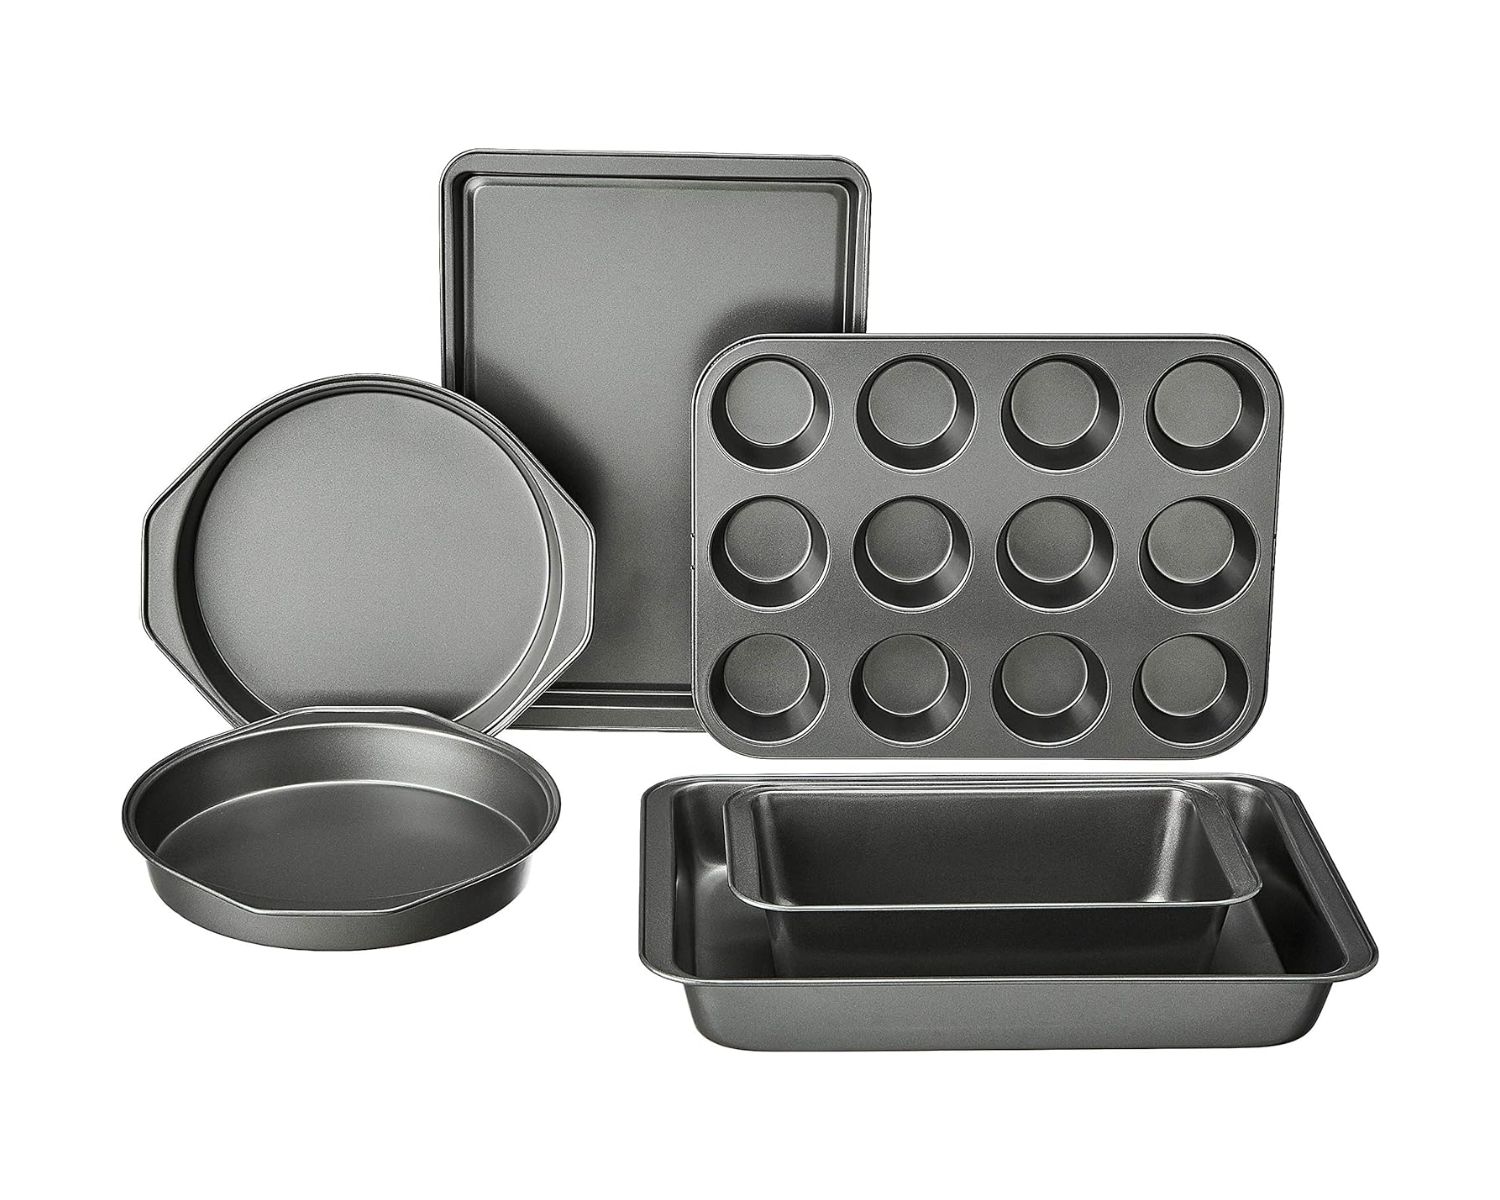 Bakeware Set Review: The Perfect Kitchen Essential